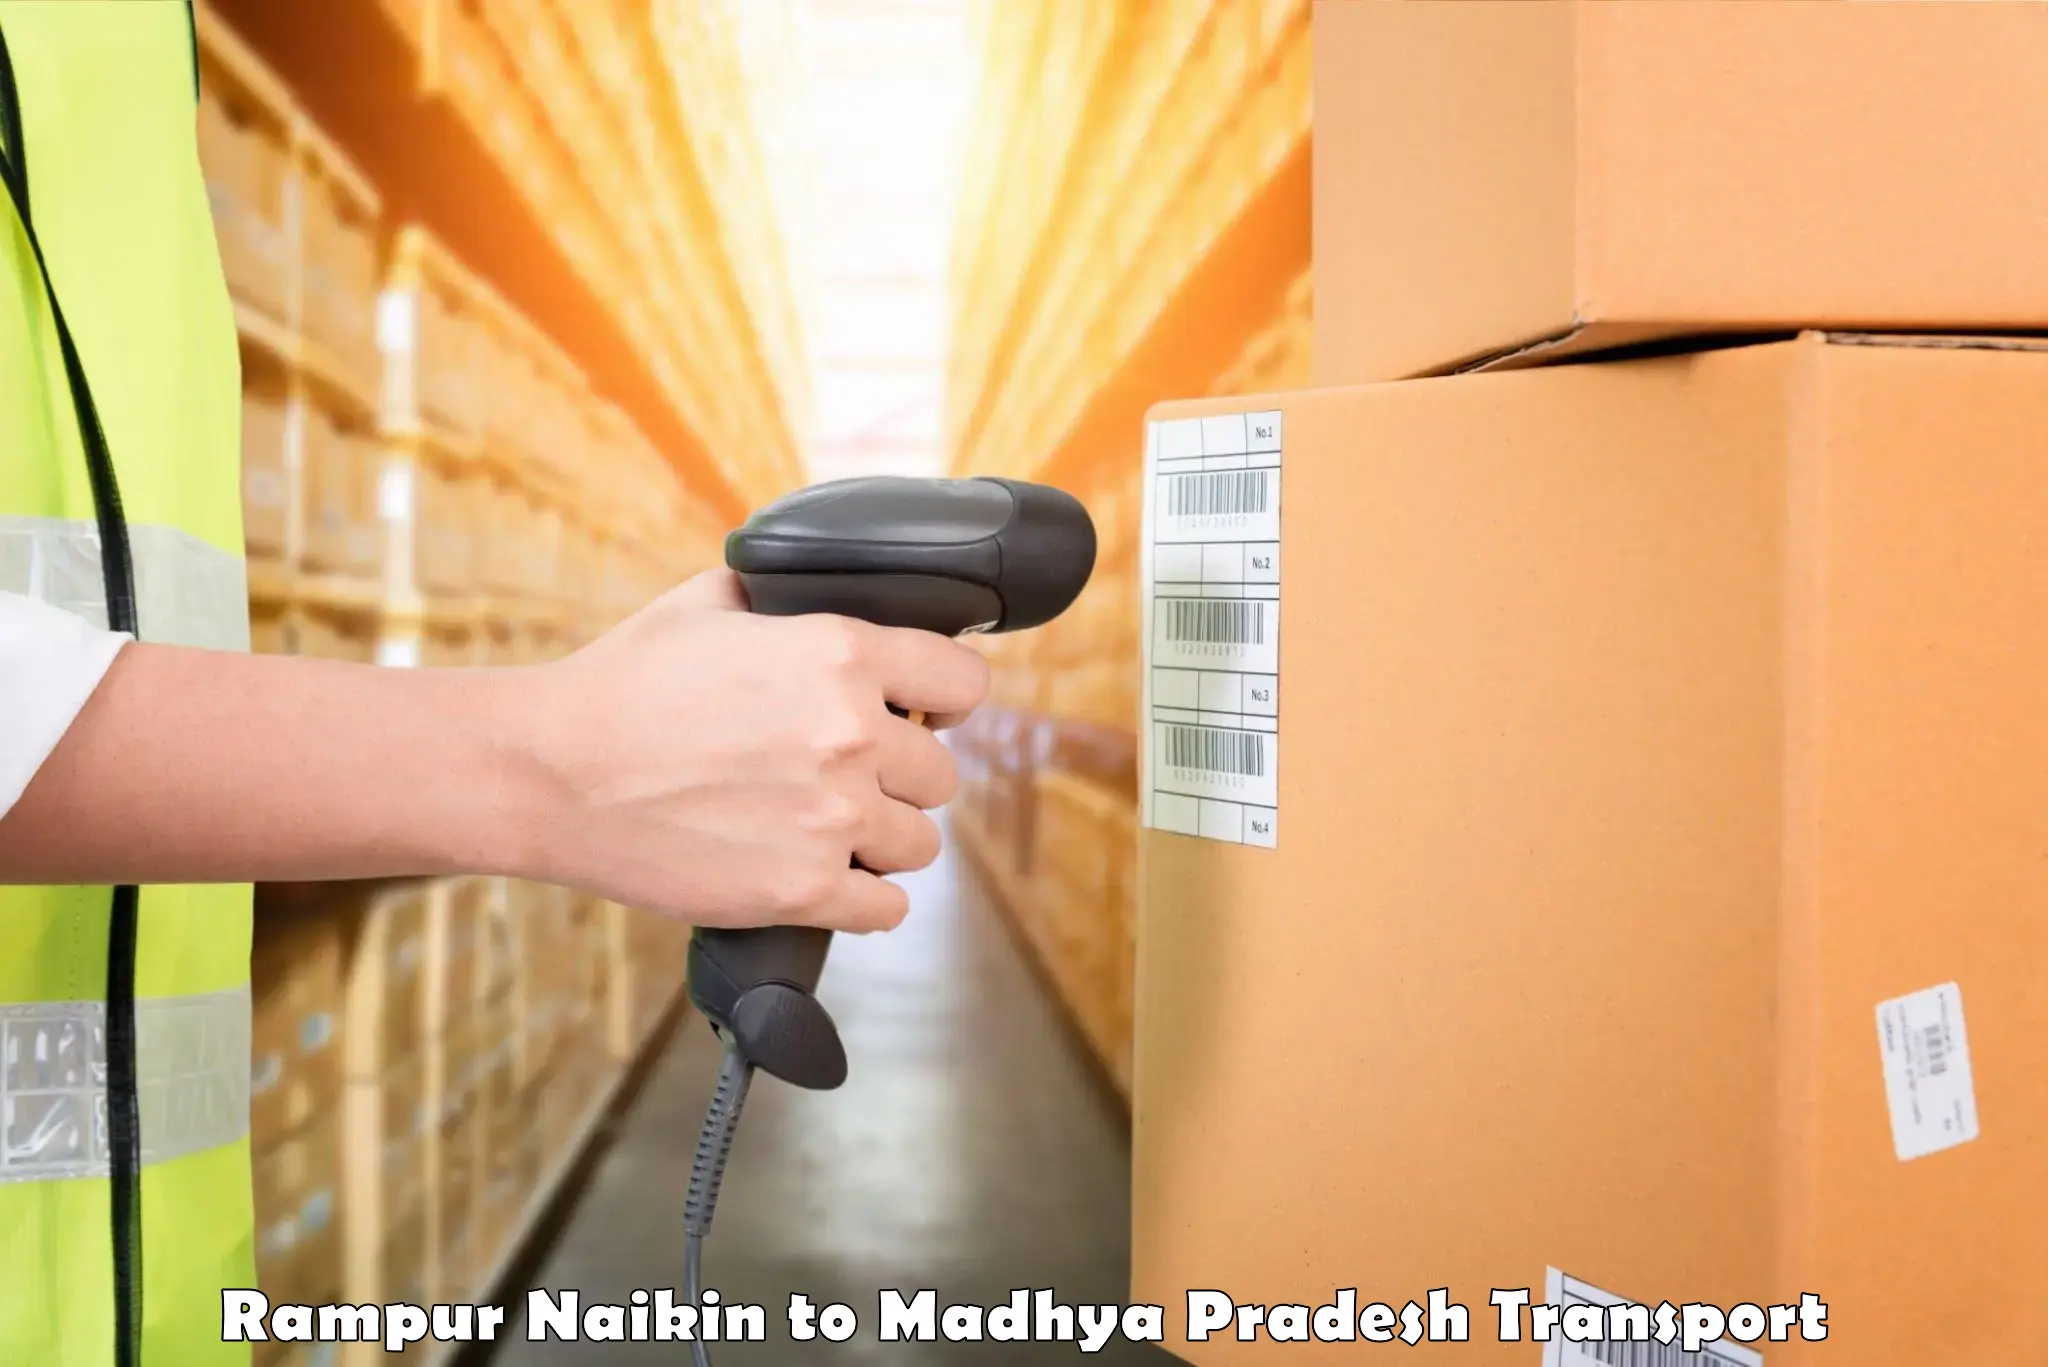 Container transport service Rampur Naikin to IIIT Bhopal